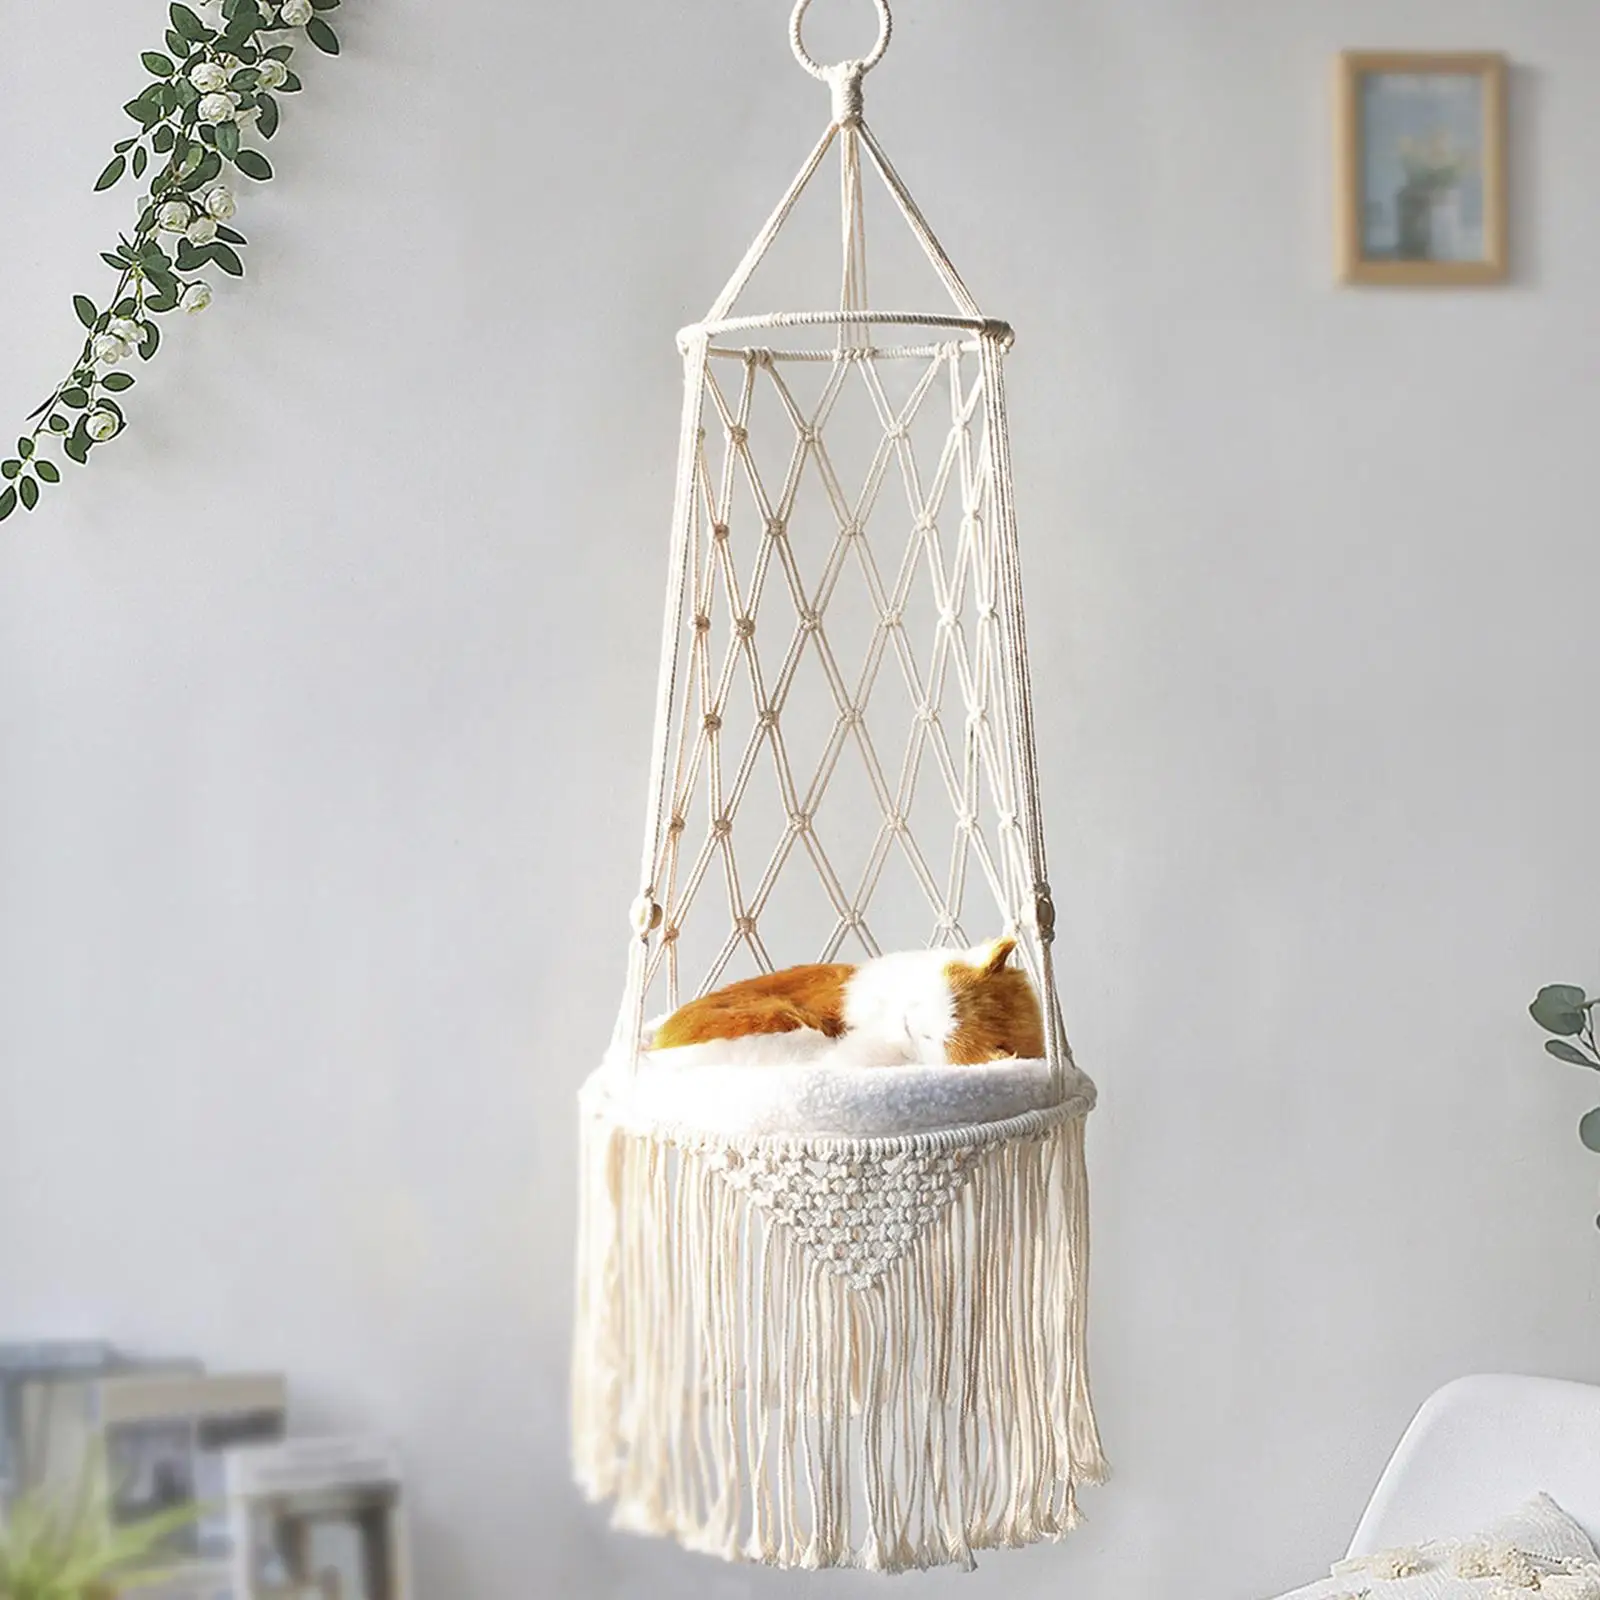 Macrame Cat Hammock Decorative Boho Tapestry Gifts Hand Woven Tassel Hanging Pet Swing Bed House for Indoor Outdoor Wall